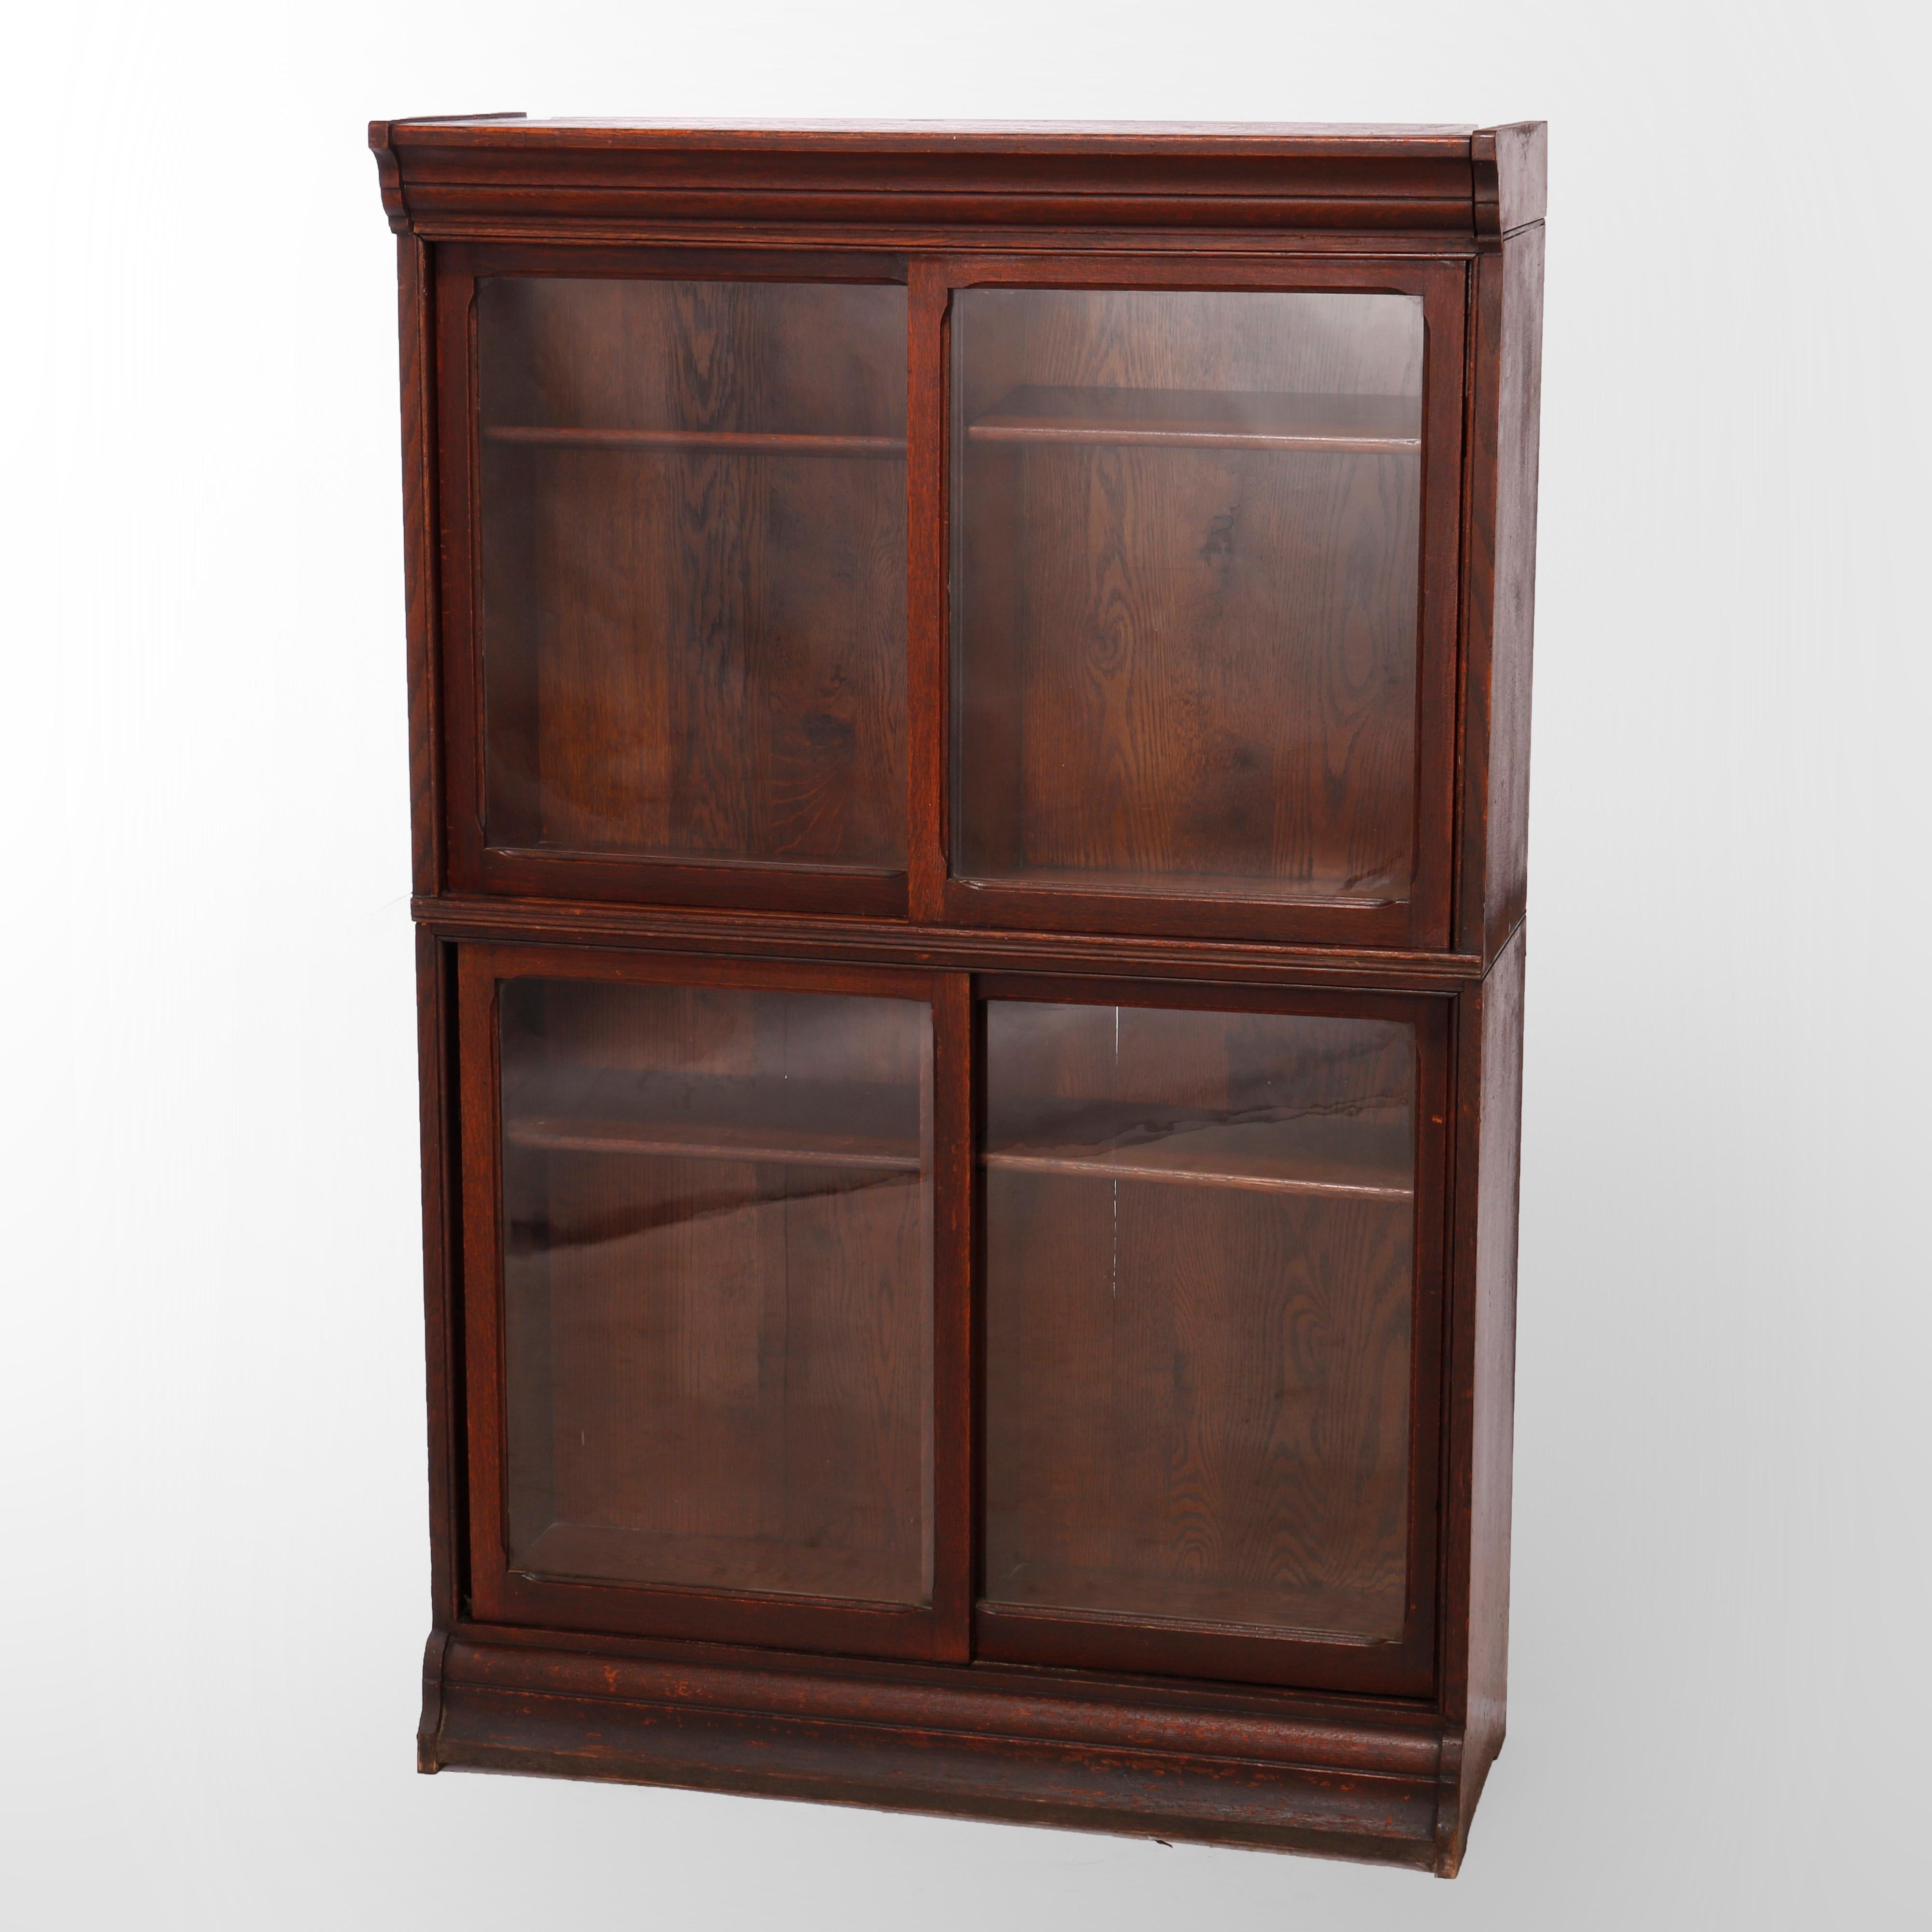 An antique Arts and Crafts bookcase by Danner offers quarter sawn oak construction with two stacks, each having sliding glass doors opening to adjustable shelf interiors, raised on ogee base, c1910


Measures - 57.75''H x 37.25''W x 13.5''D overall;